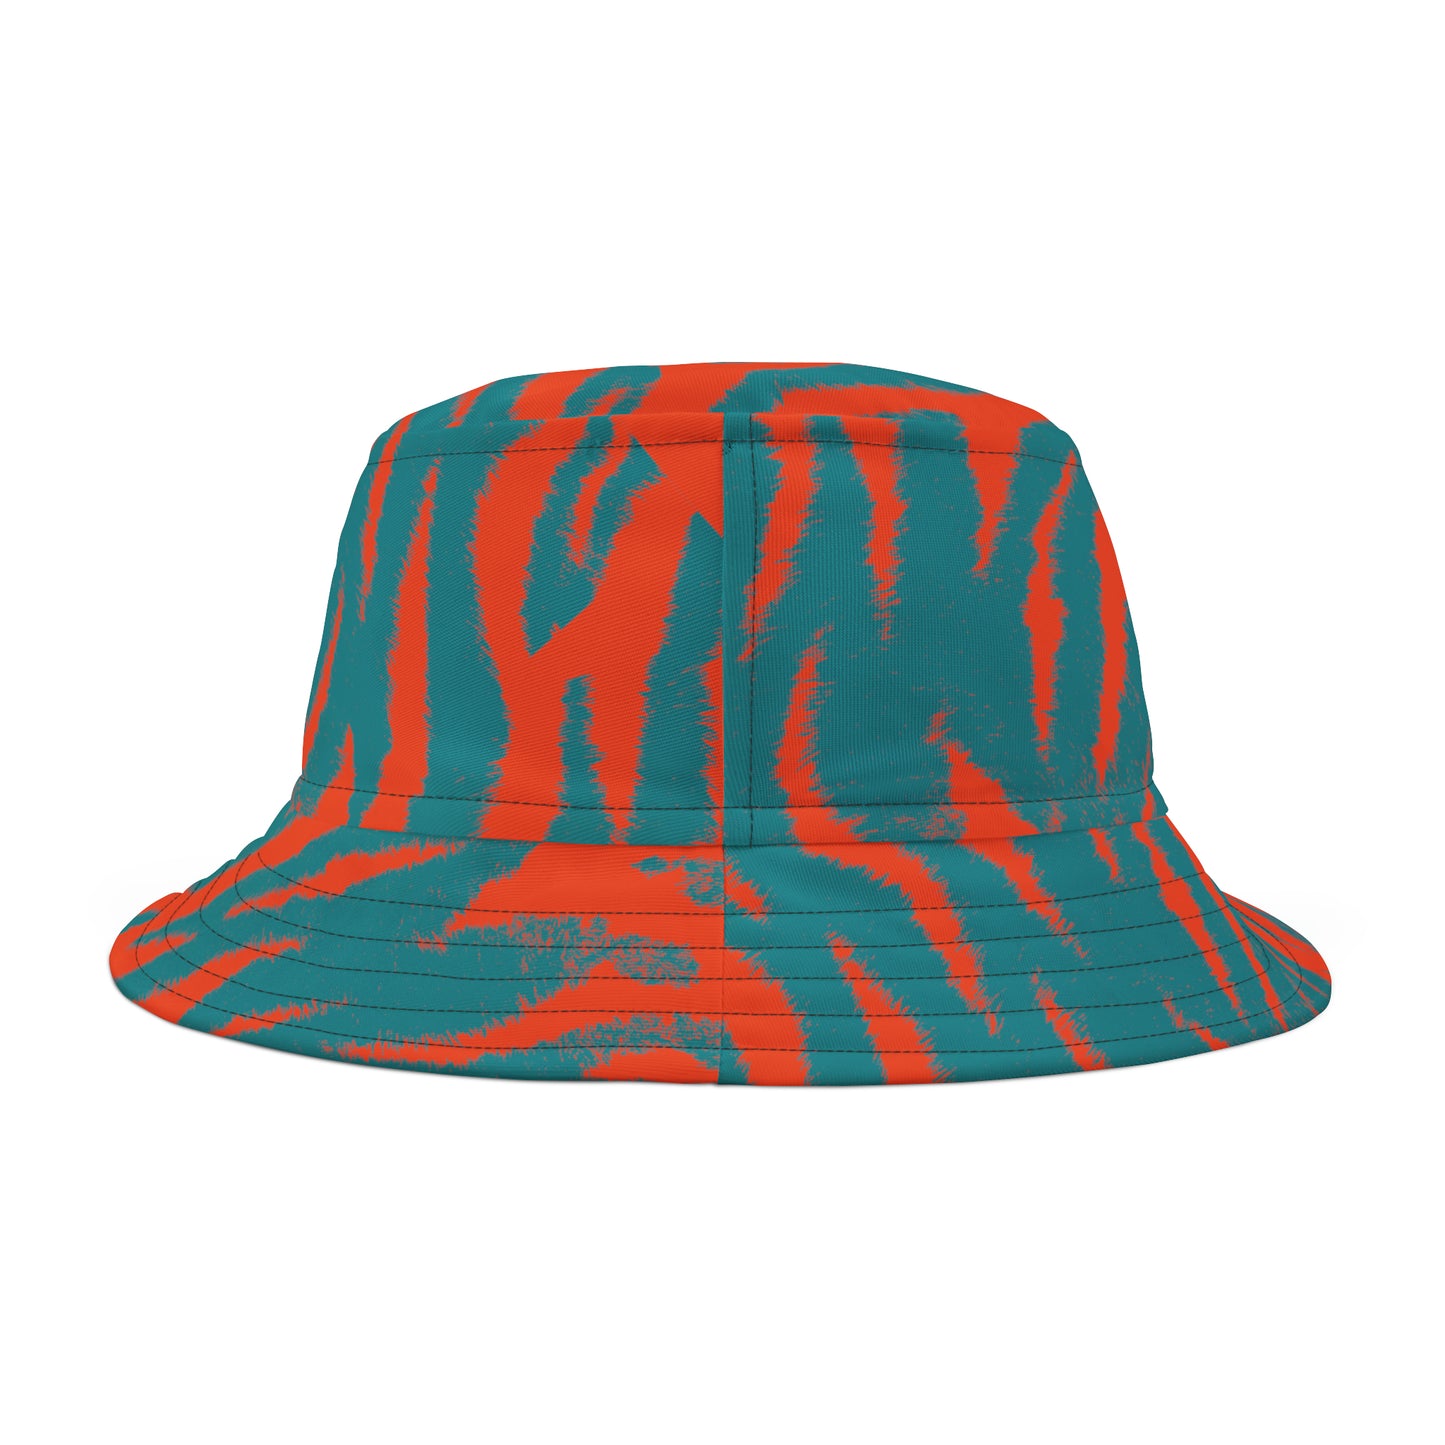 If swimming mammals could have stripes - Bucket Hat (AOP)